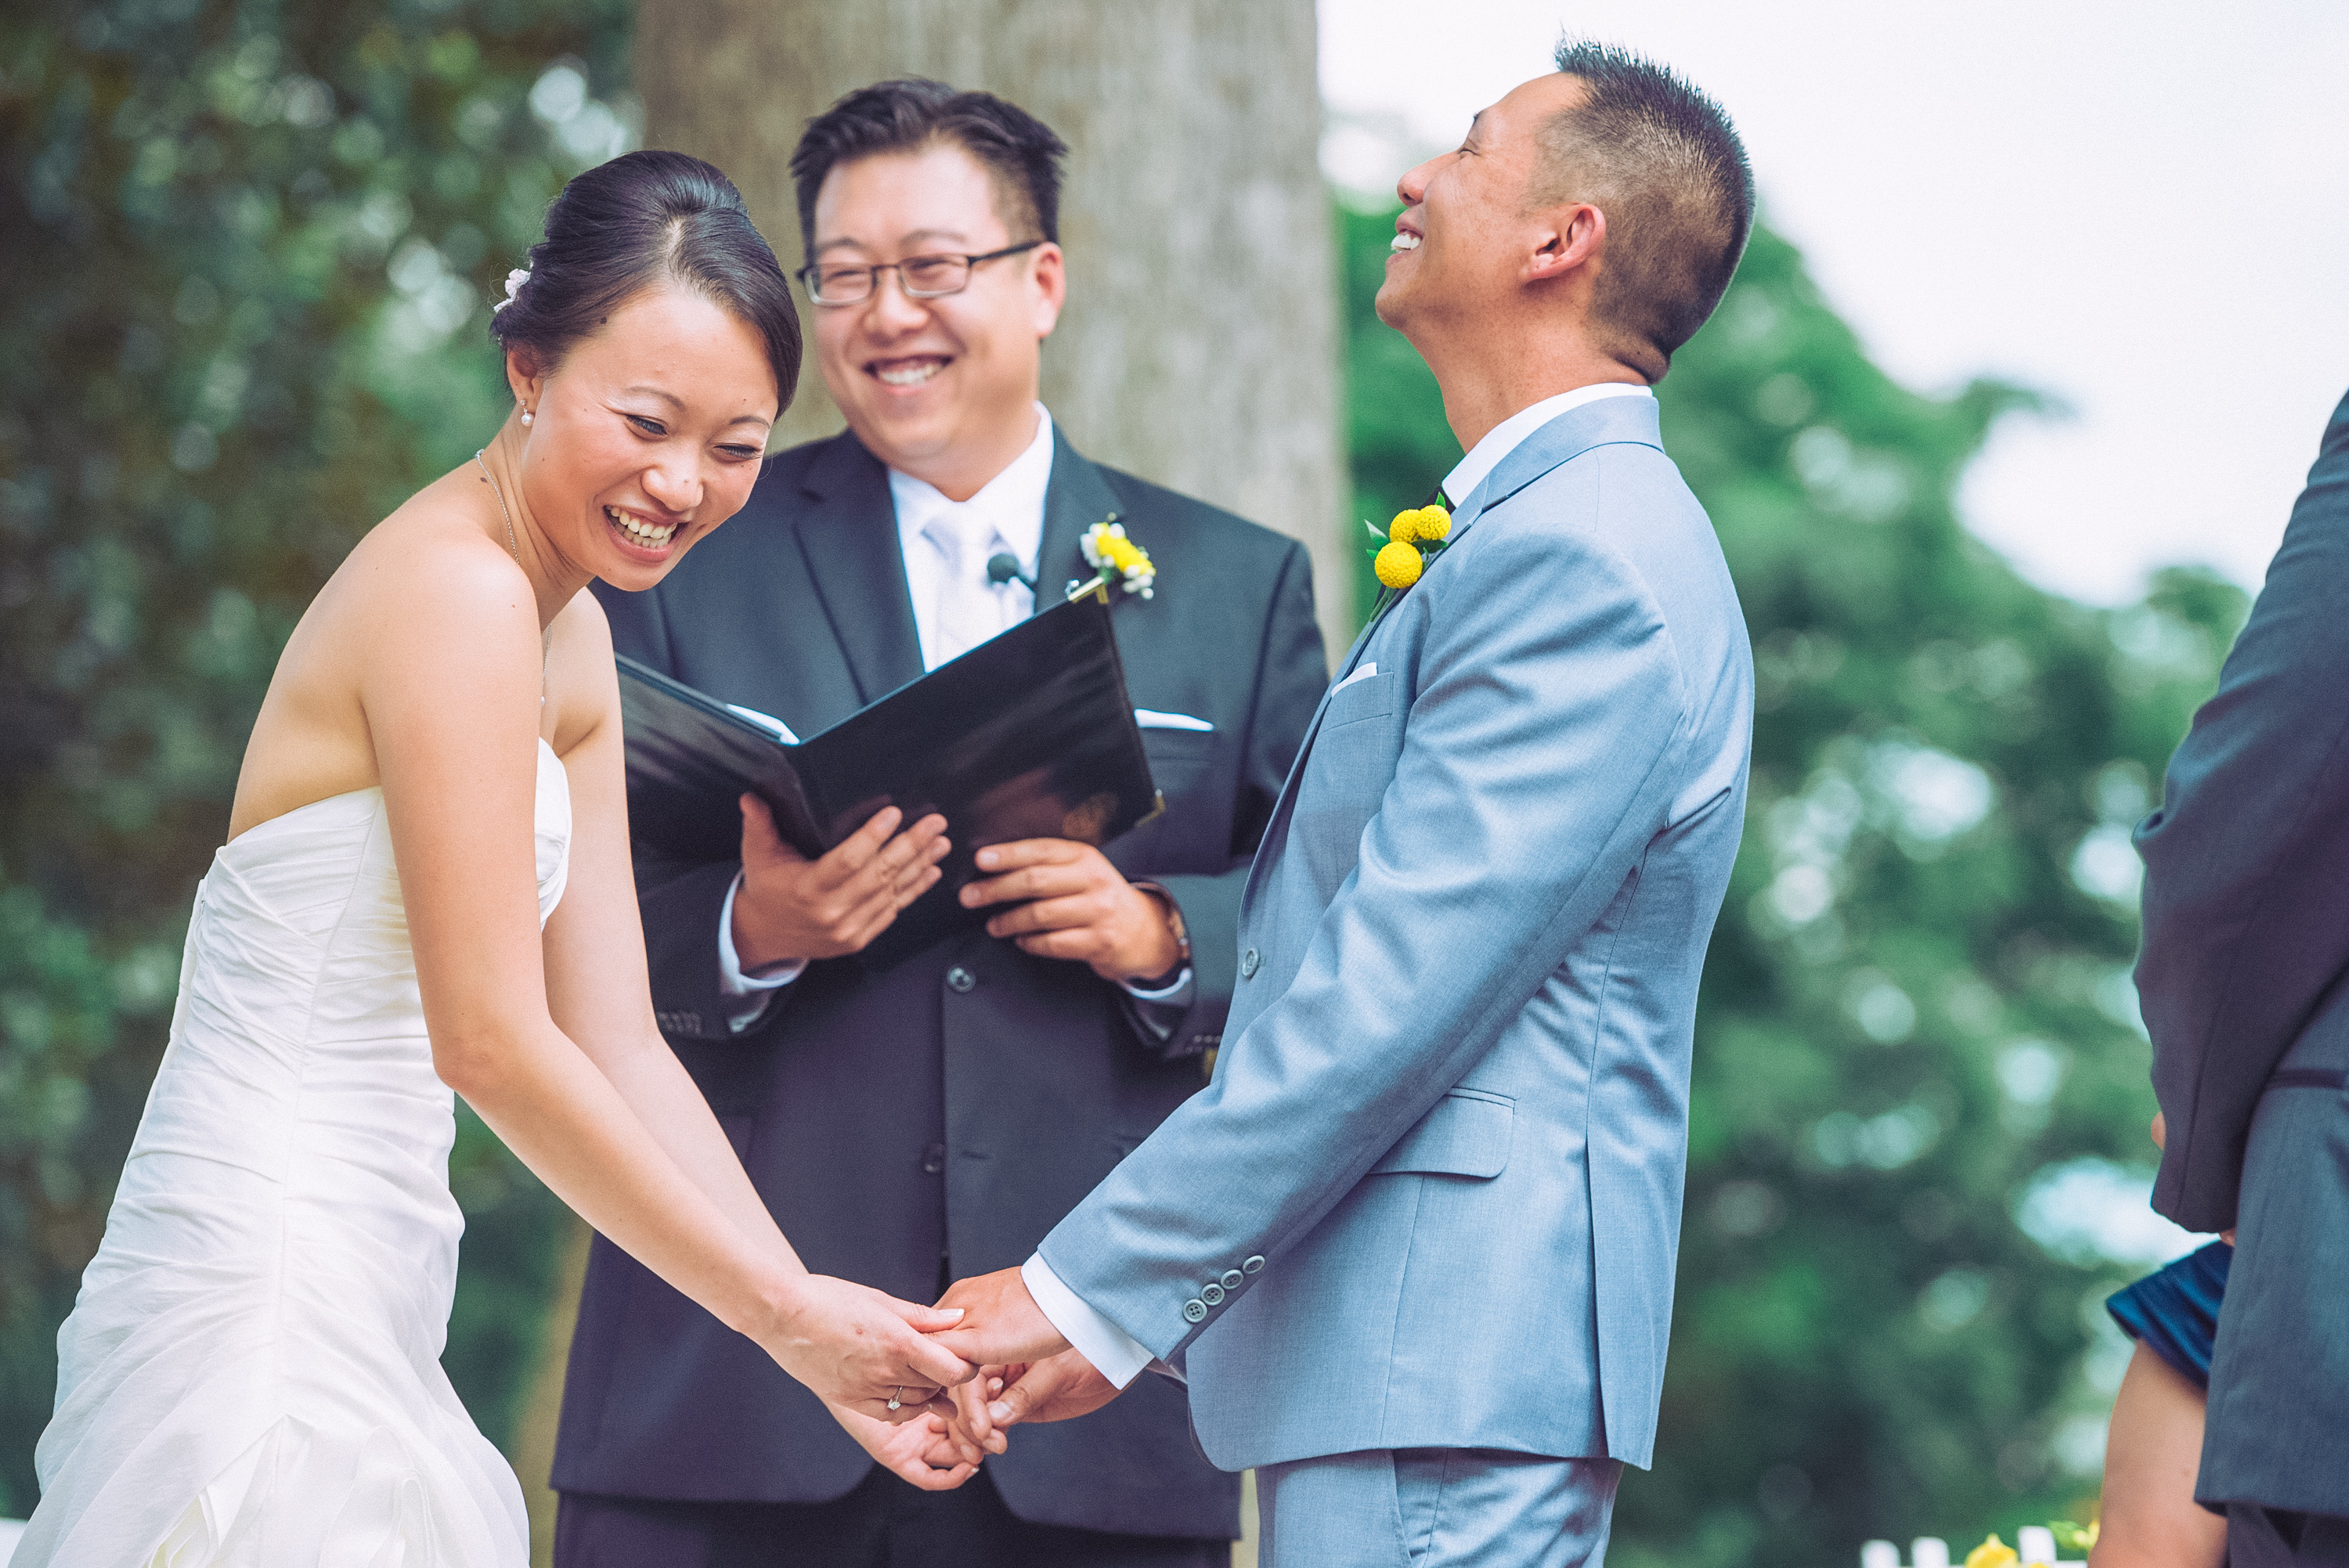 A wedding couple laugh during their ceremony.